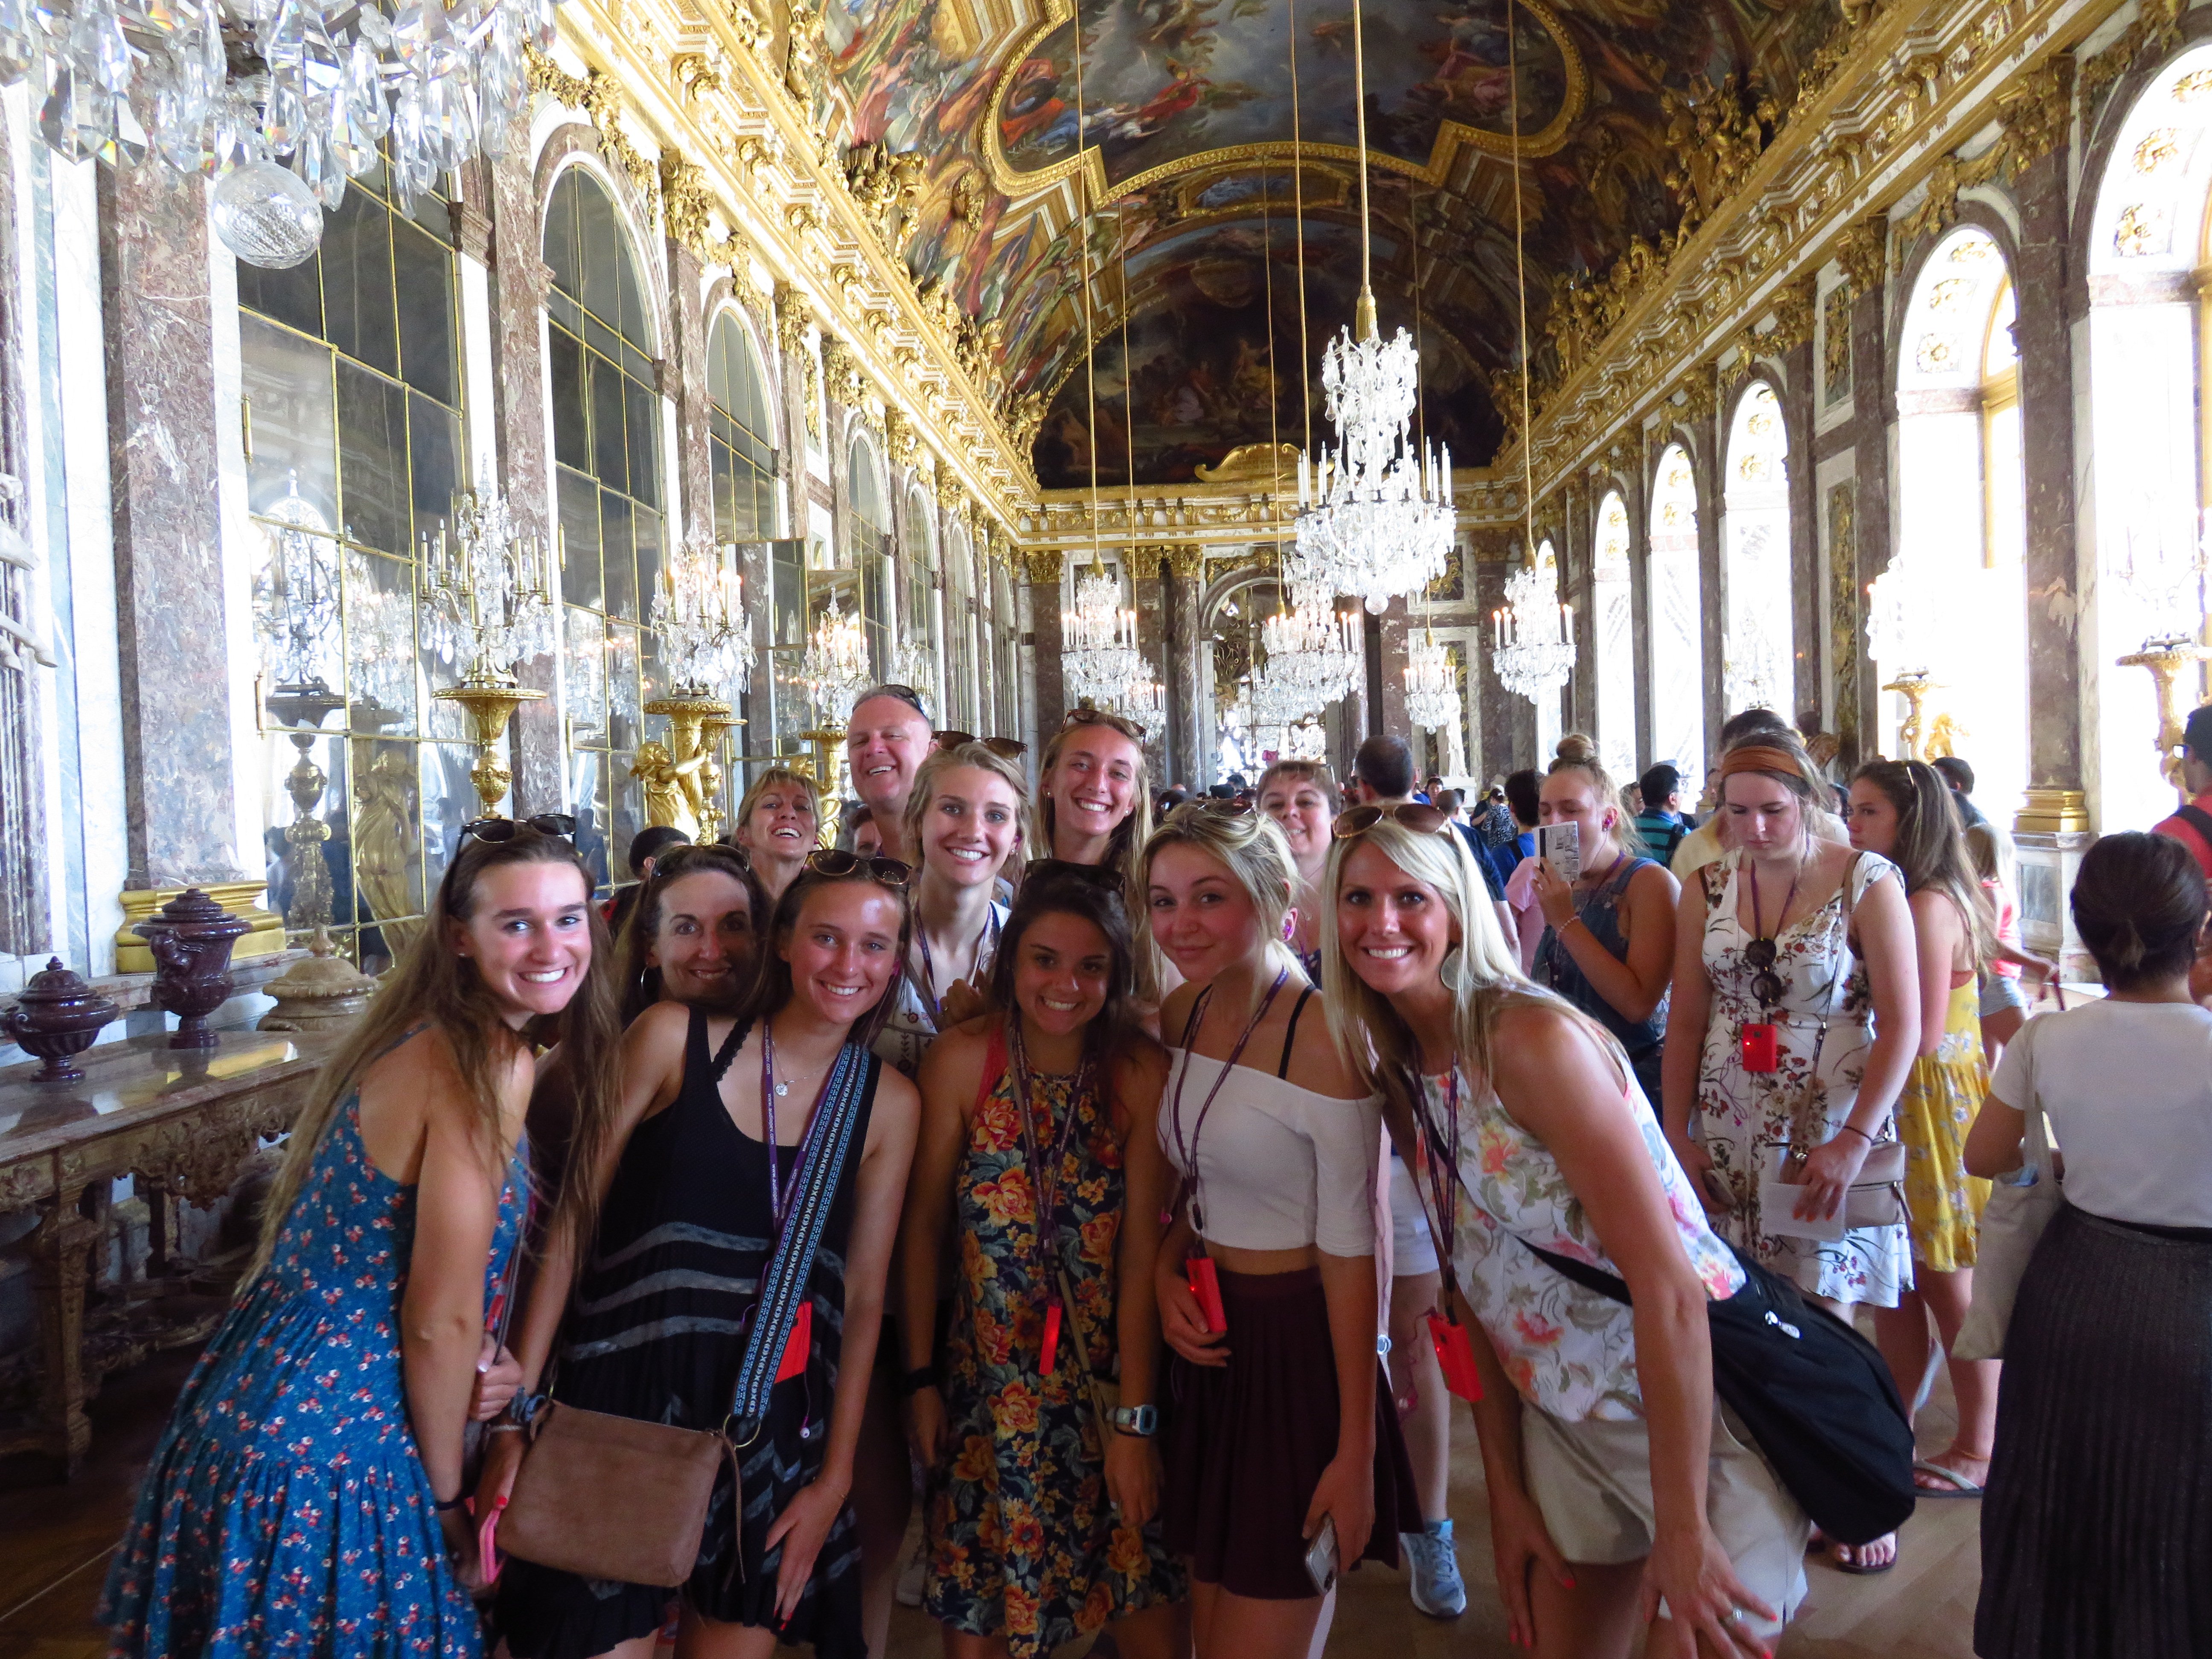 JSED_Europe_France_Versailles_Youth_Posing_Galerie des Glaces